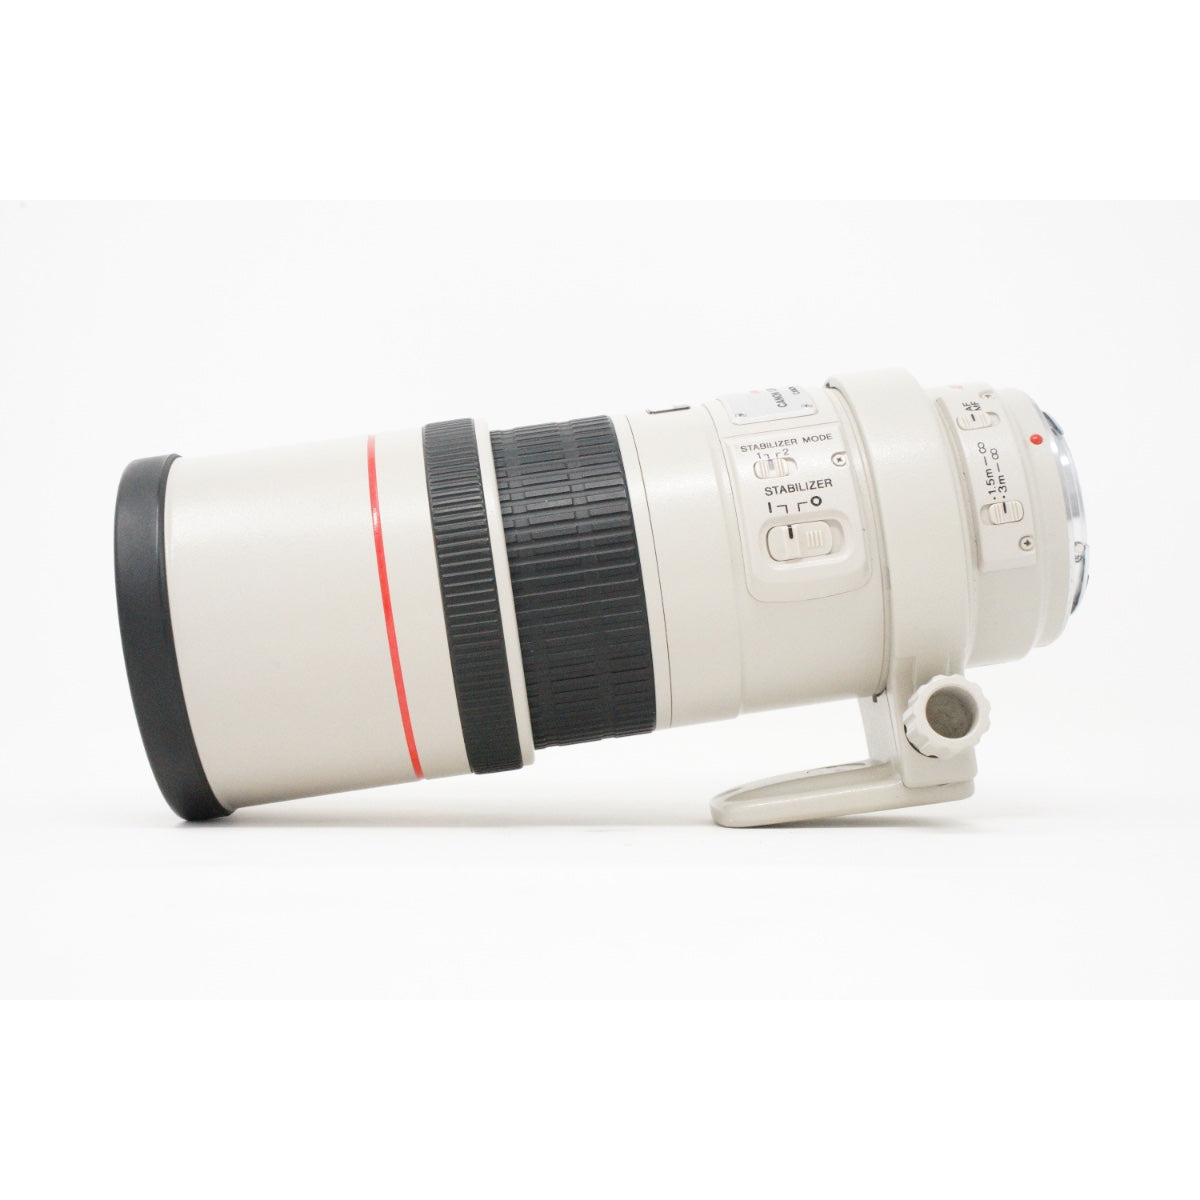 USED Canon EF 300mm f4 L IS USM Image Stabilising Lens